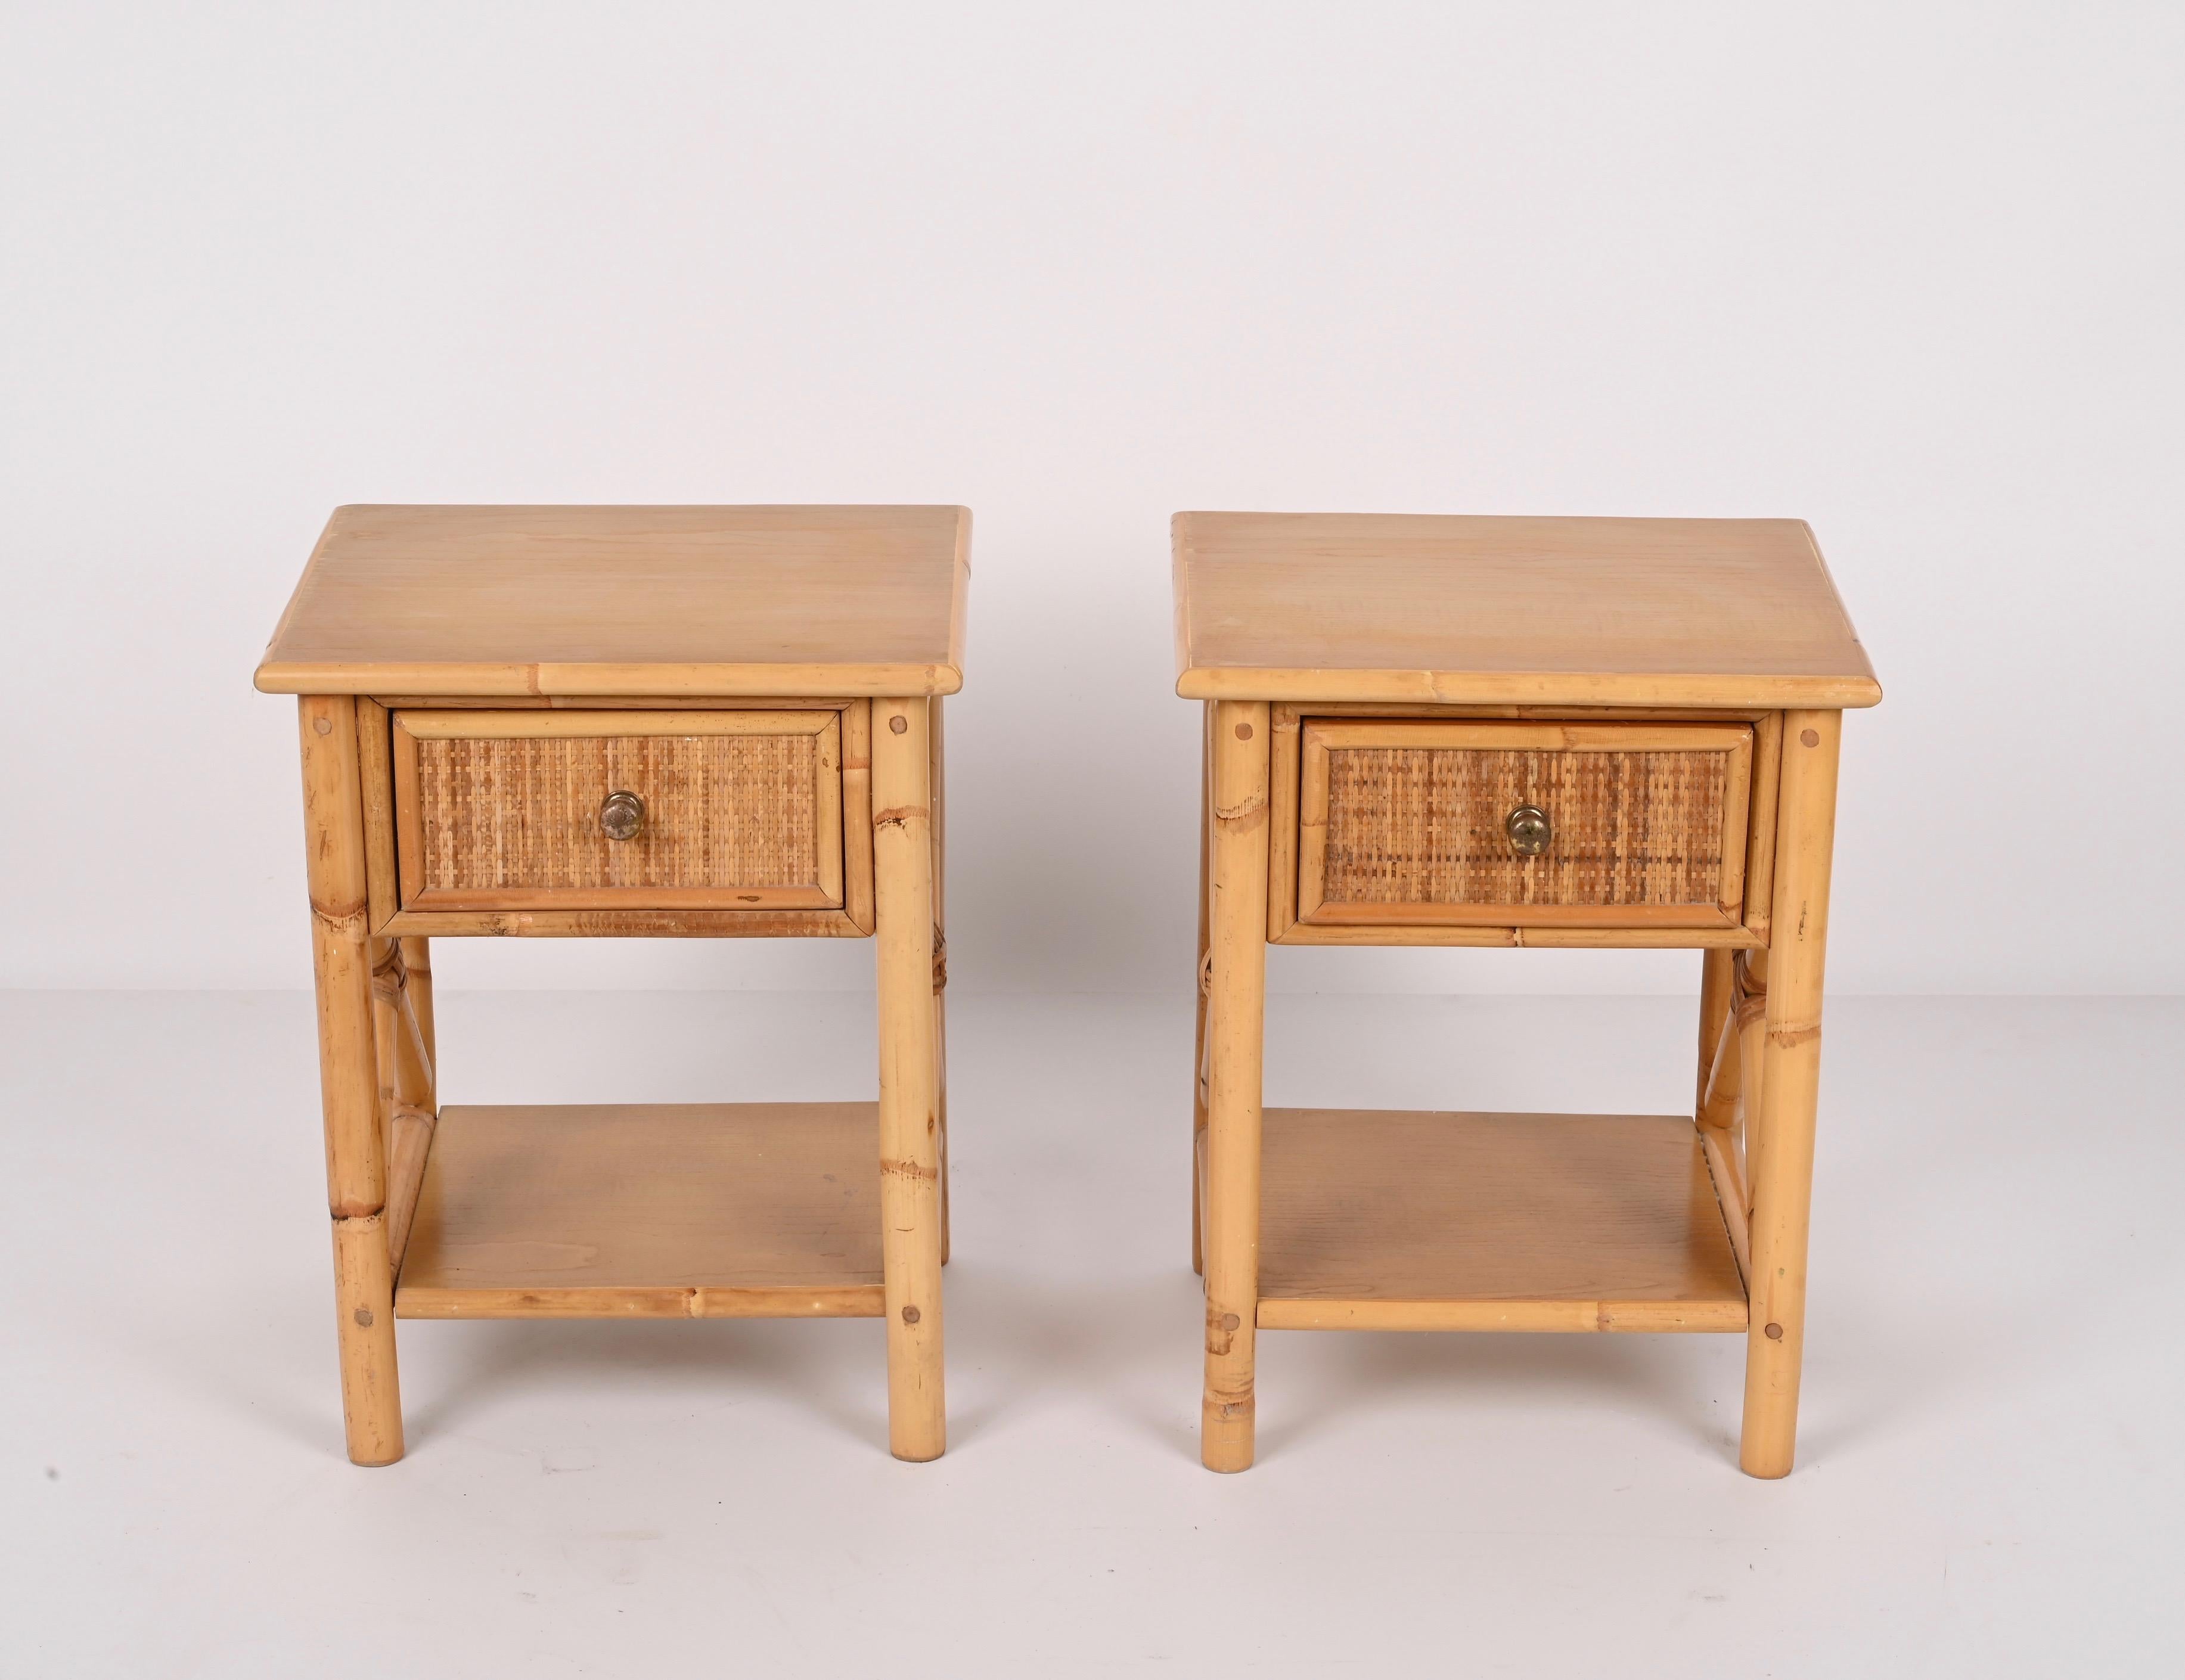 Wicker Pair of Mid-Century Modern Bamboo Rattan and Wood Italian Bedside Tables, 1980s